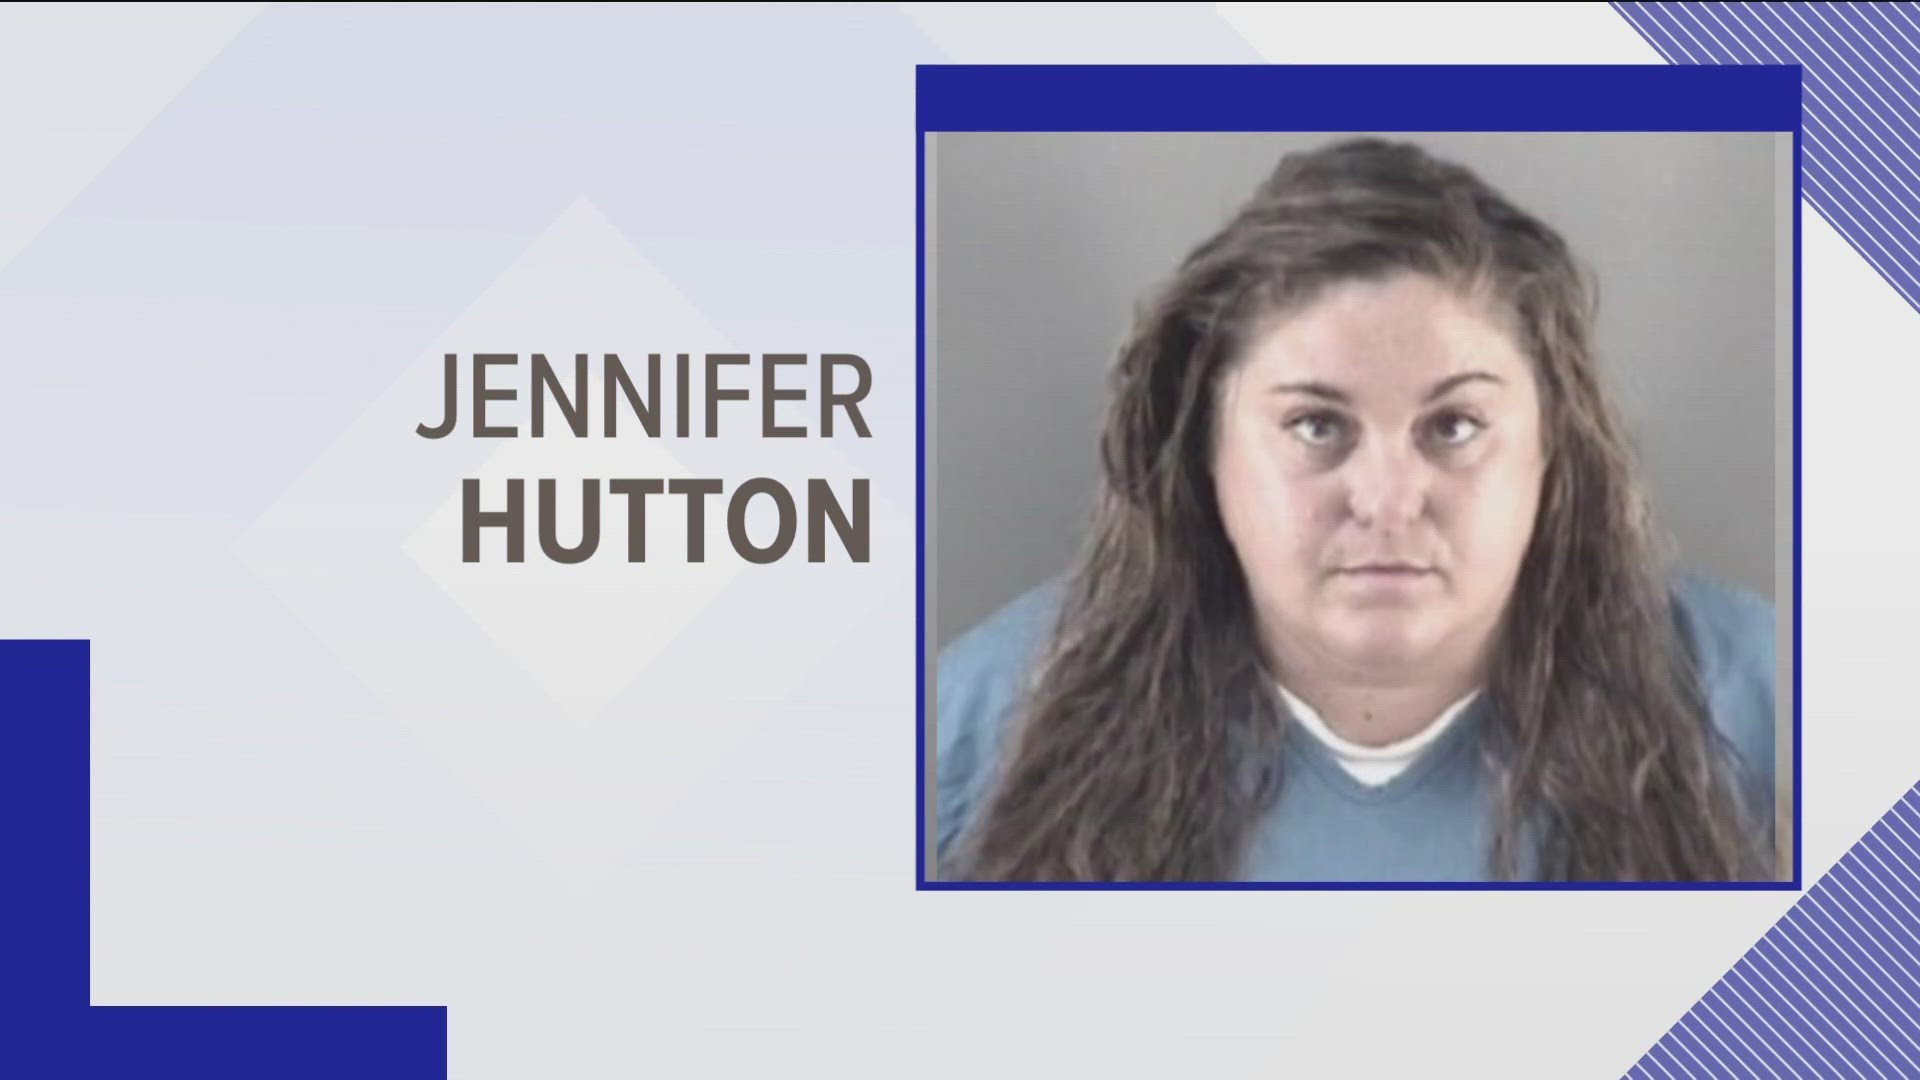 Jennifer Hutton, of Perrysburg, has pleaded not guilty to aggravated menacing and disorderly conduct charges.